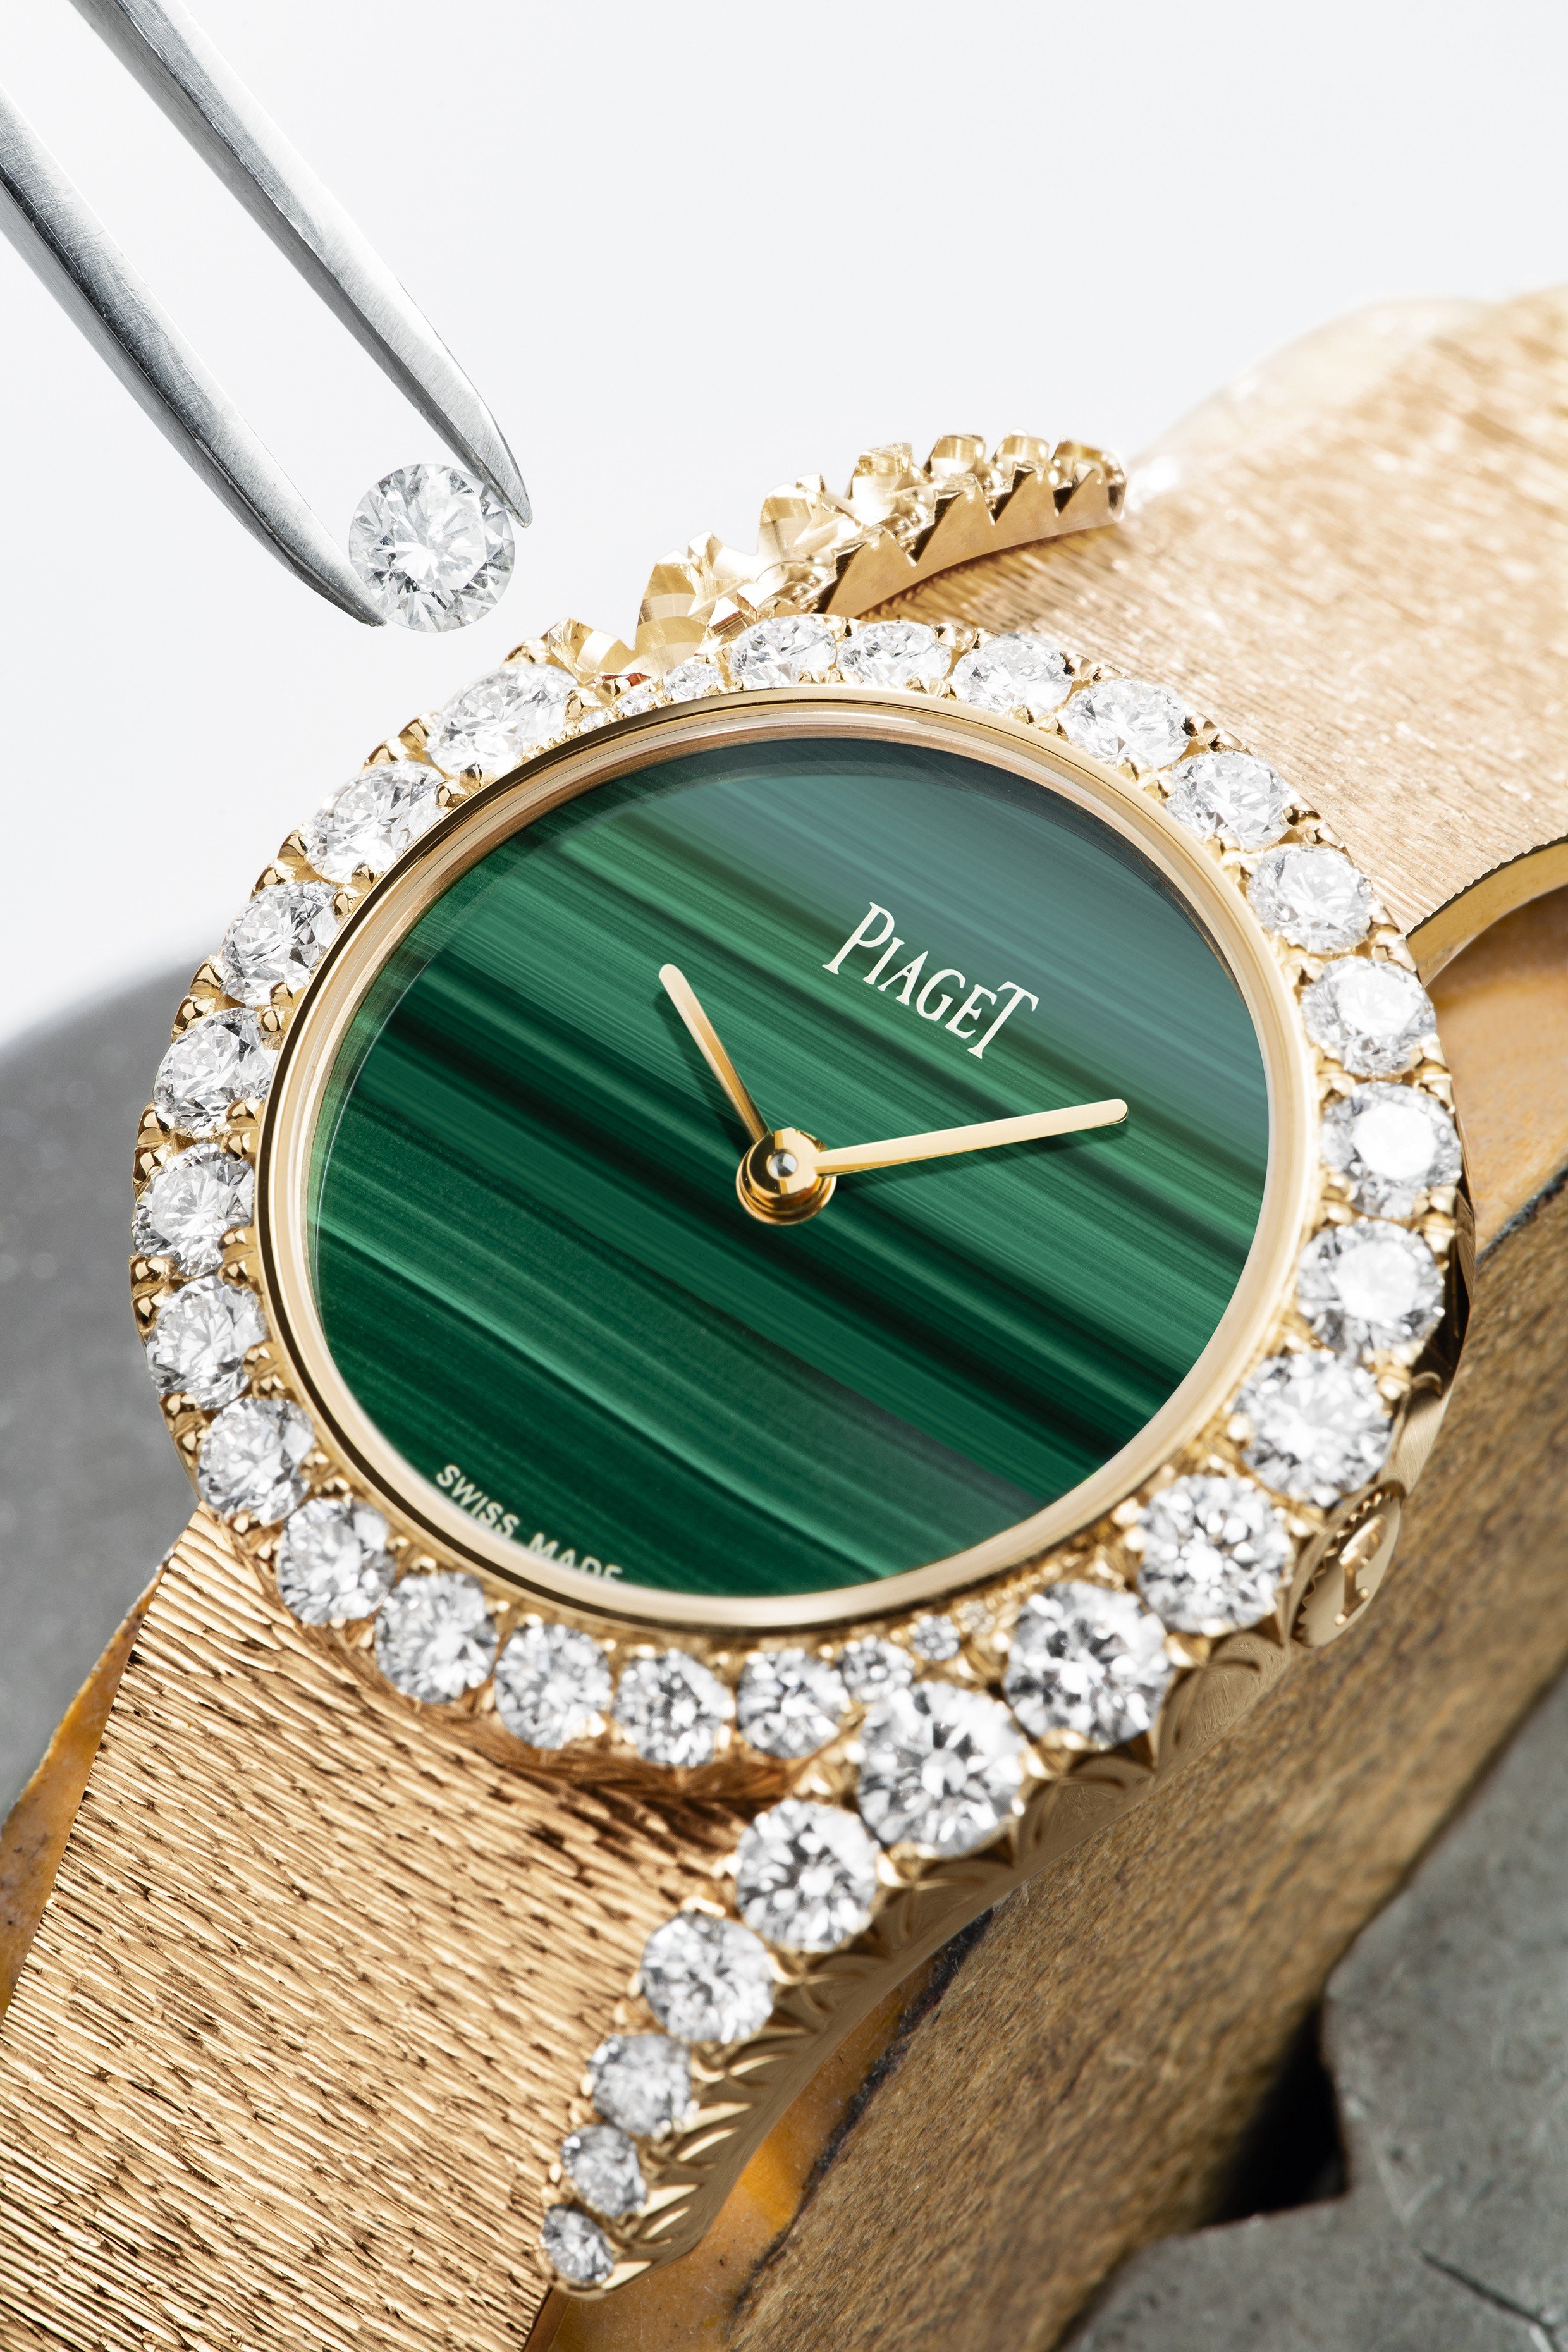 Piaget's Limelight Gala watch with gold bracelet